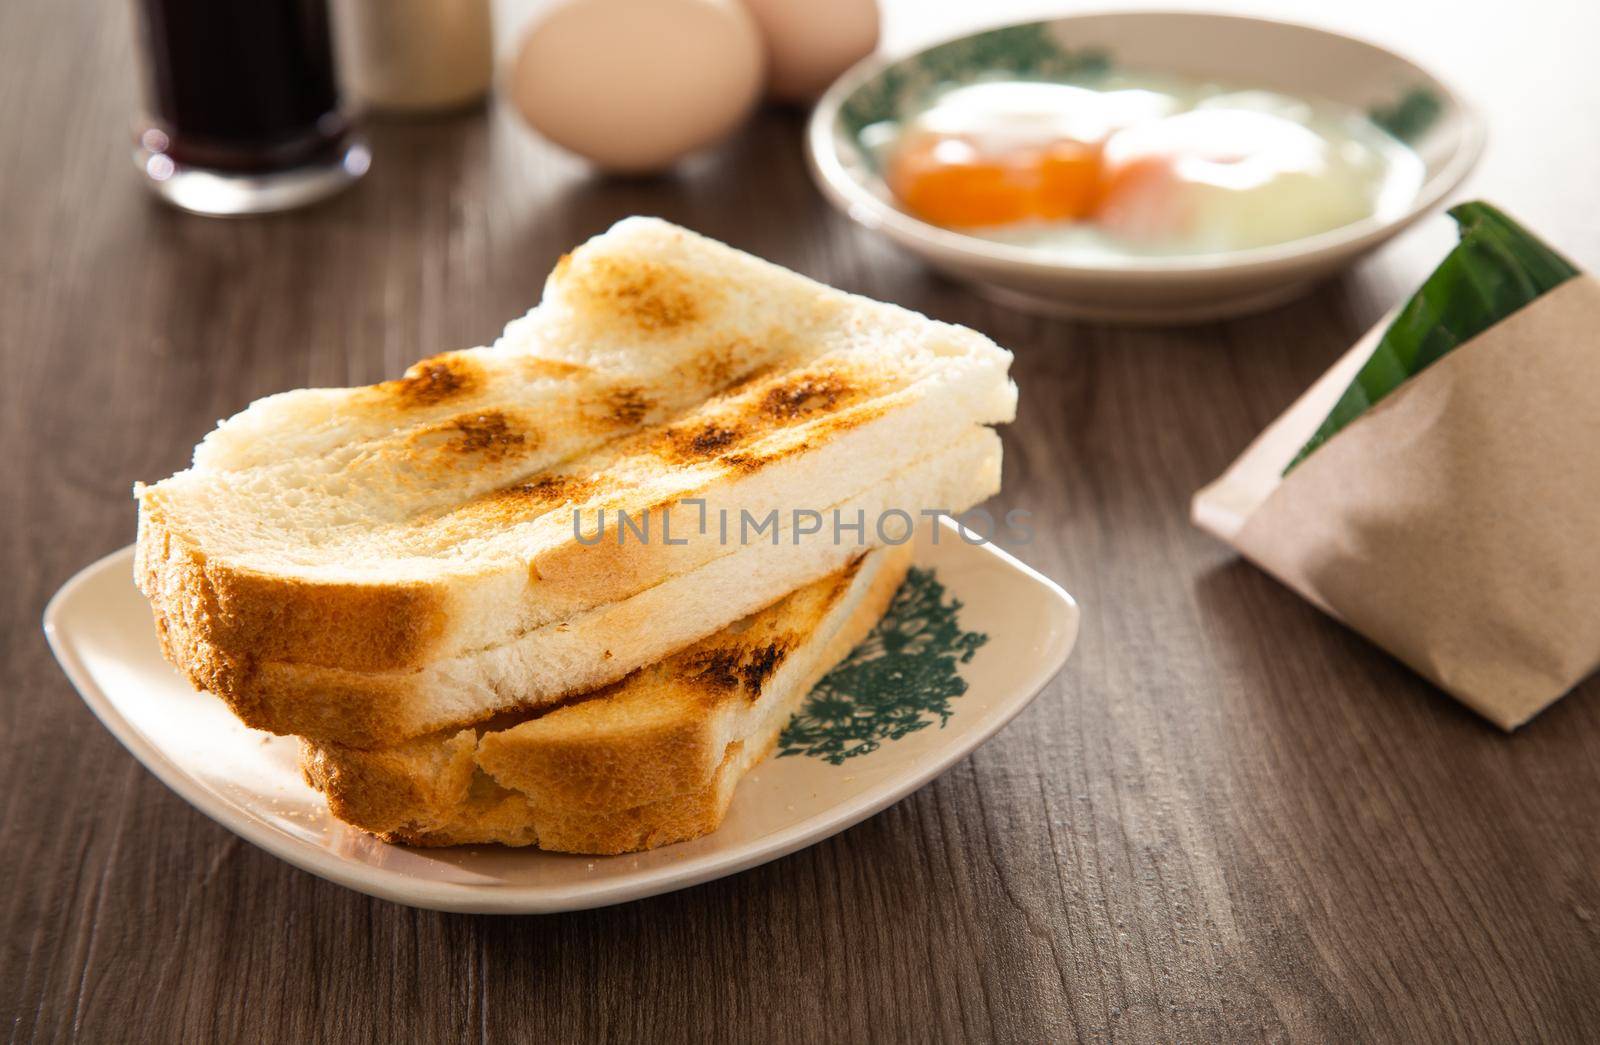 Common oriental breakfast set in Malaysia consisting of coffee, nasi lemak, toast bread and half-boiled egg